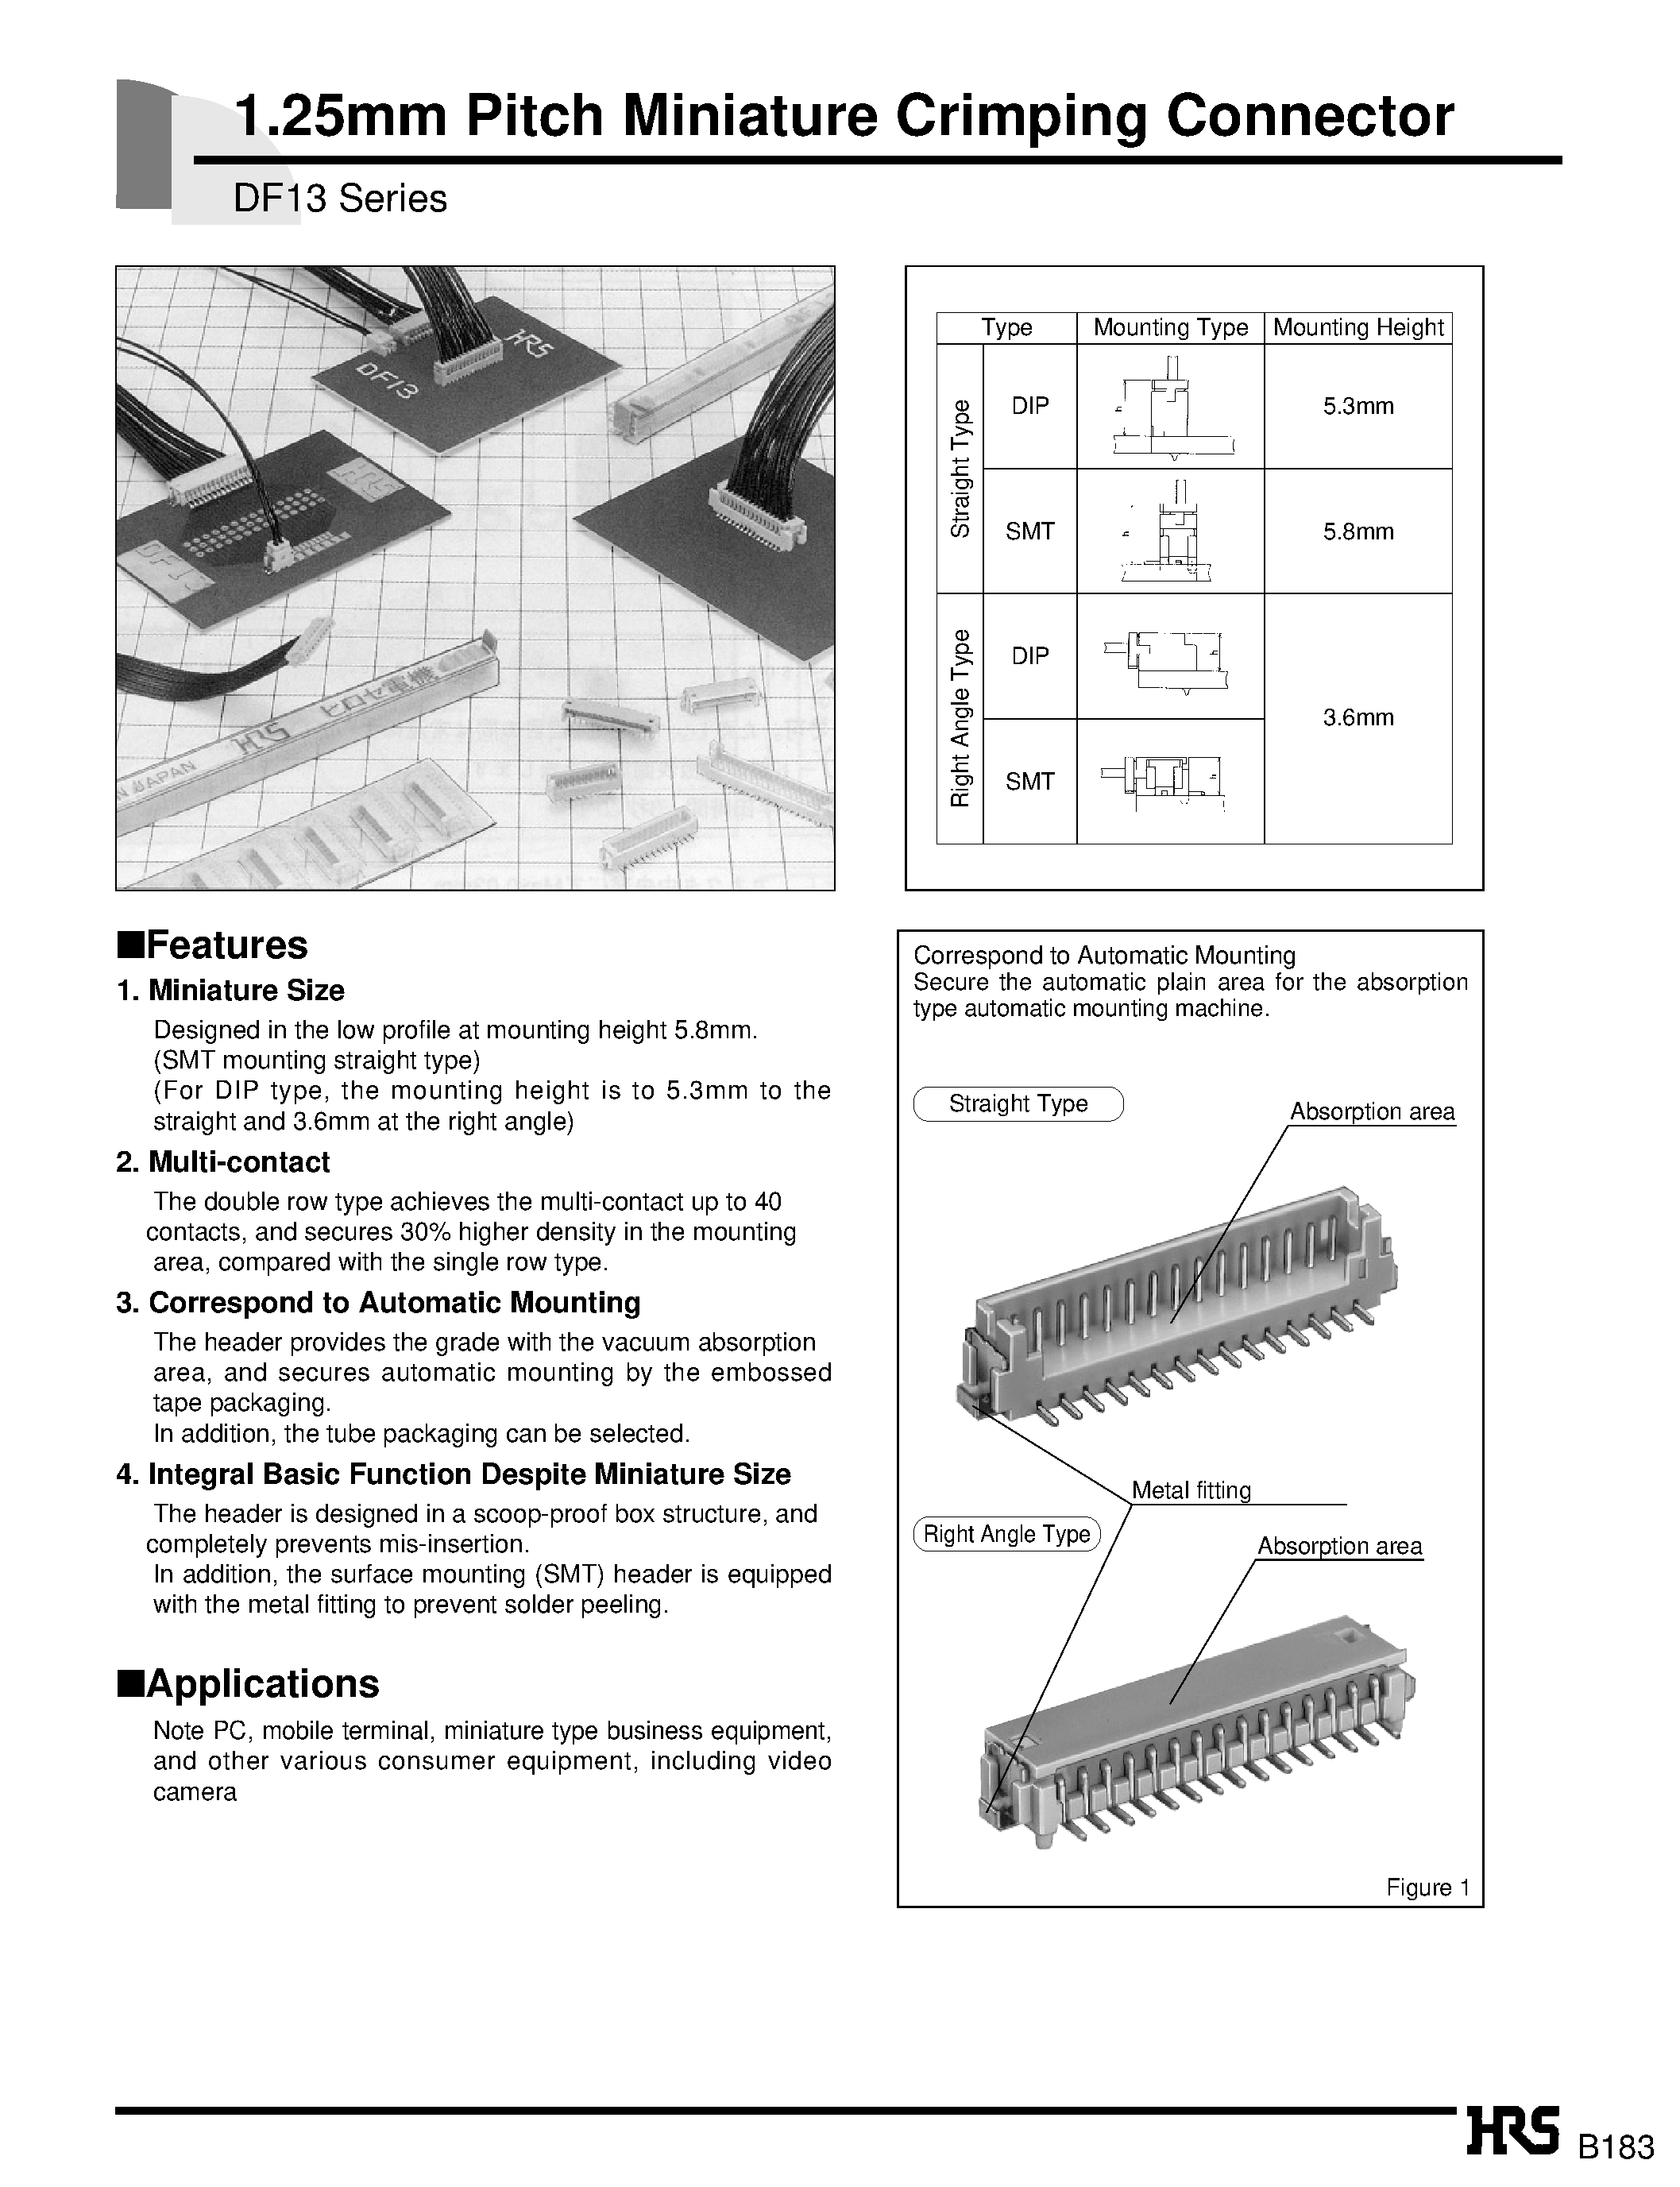 Datasheet DF13-12S-1.25V - 1.25mm Pitch Miniature Crimping Connector page 1